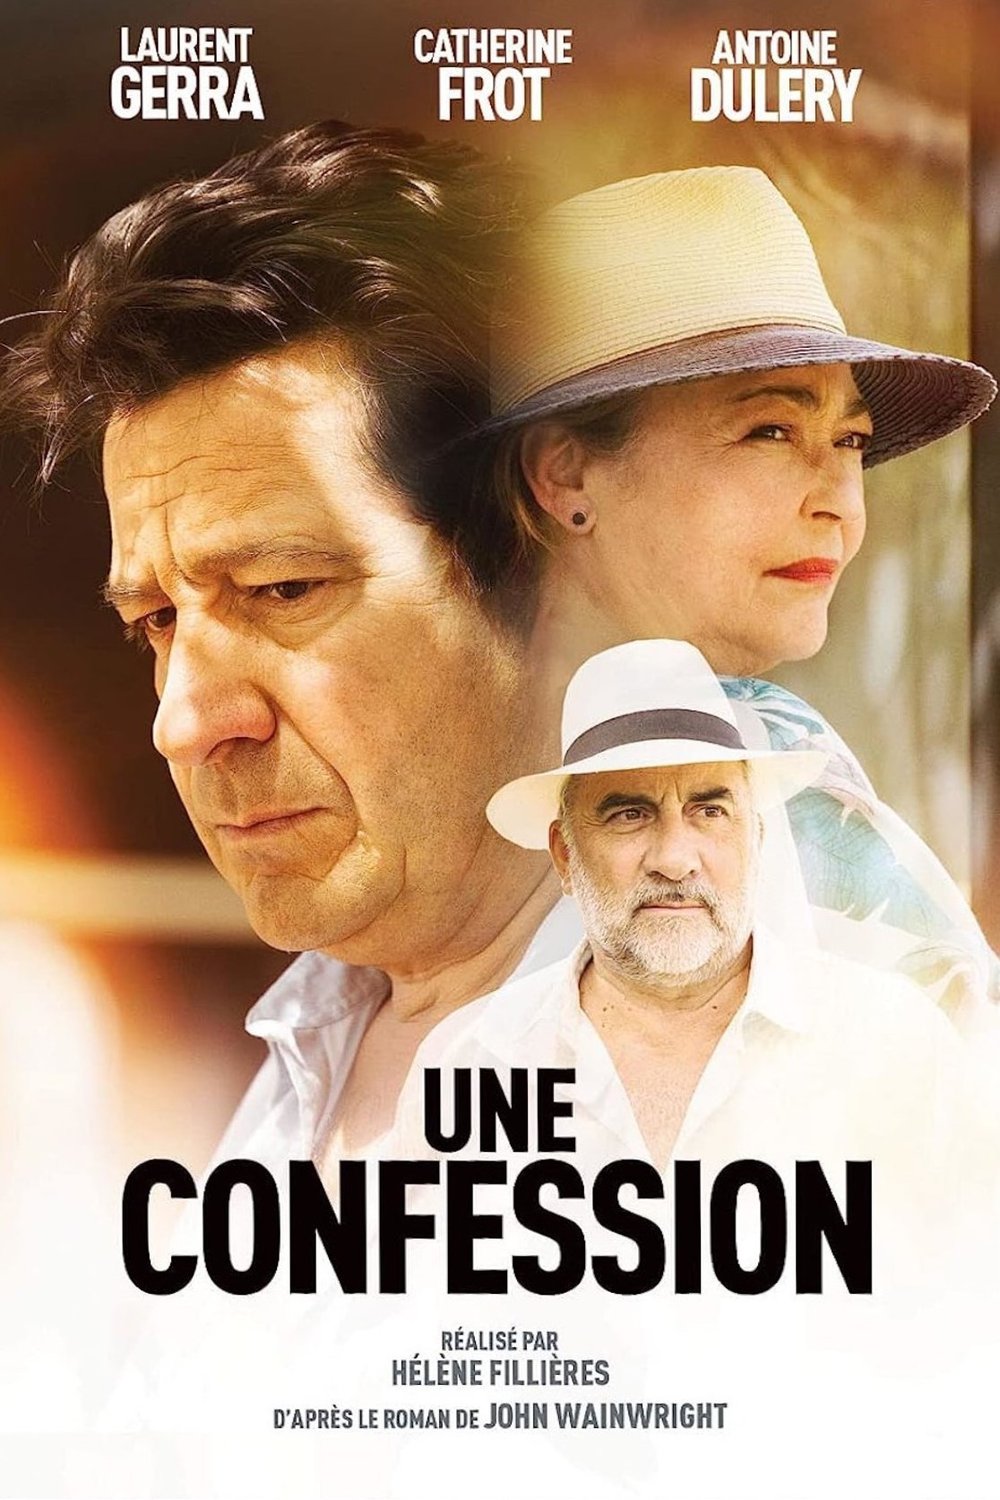 Poster of the movie Une confession